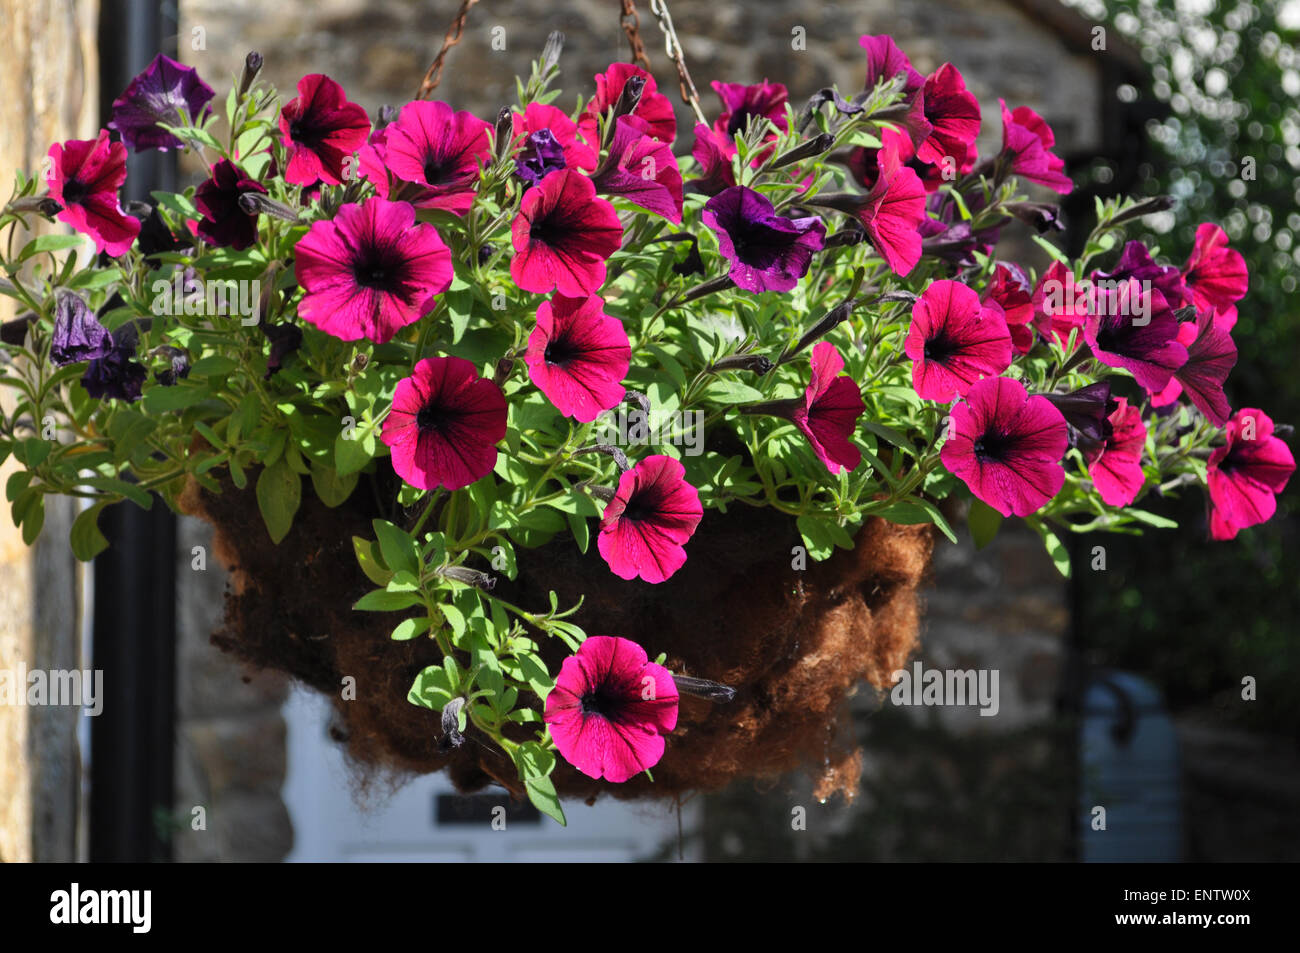 Trailing petunias in a hanging basket. Stock Photo